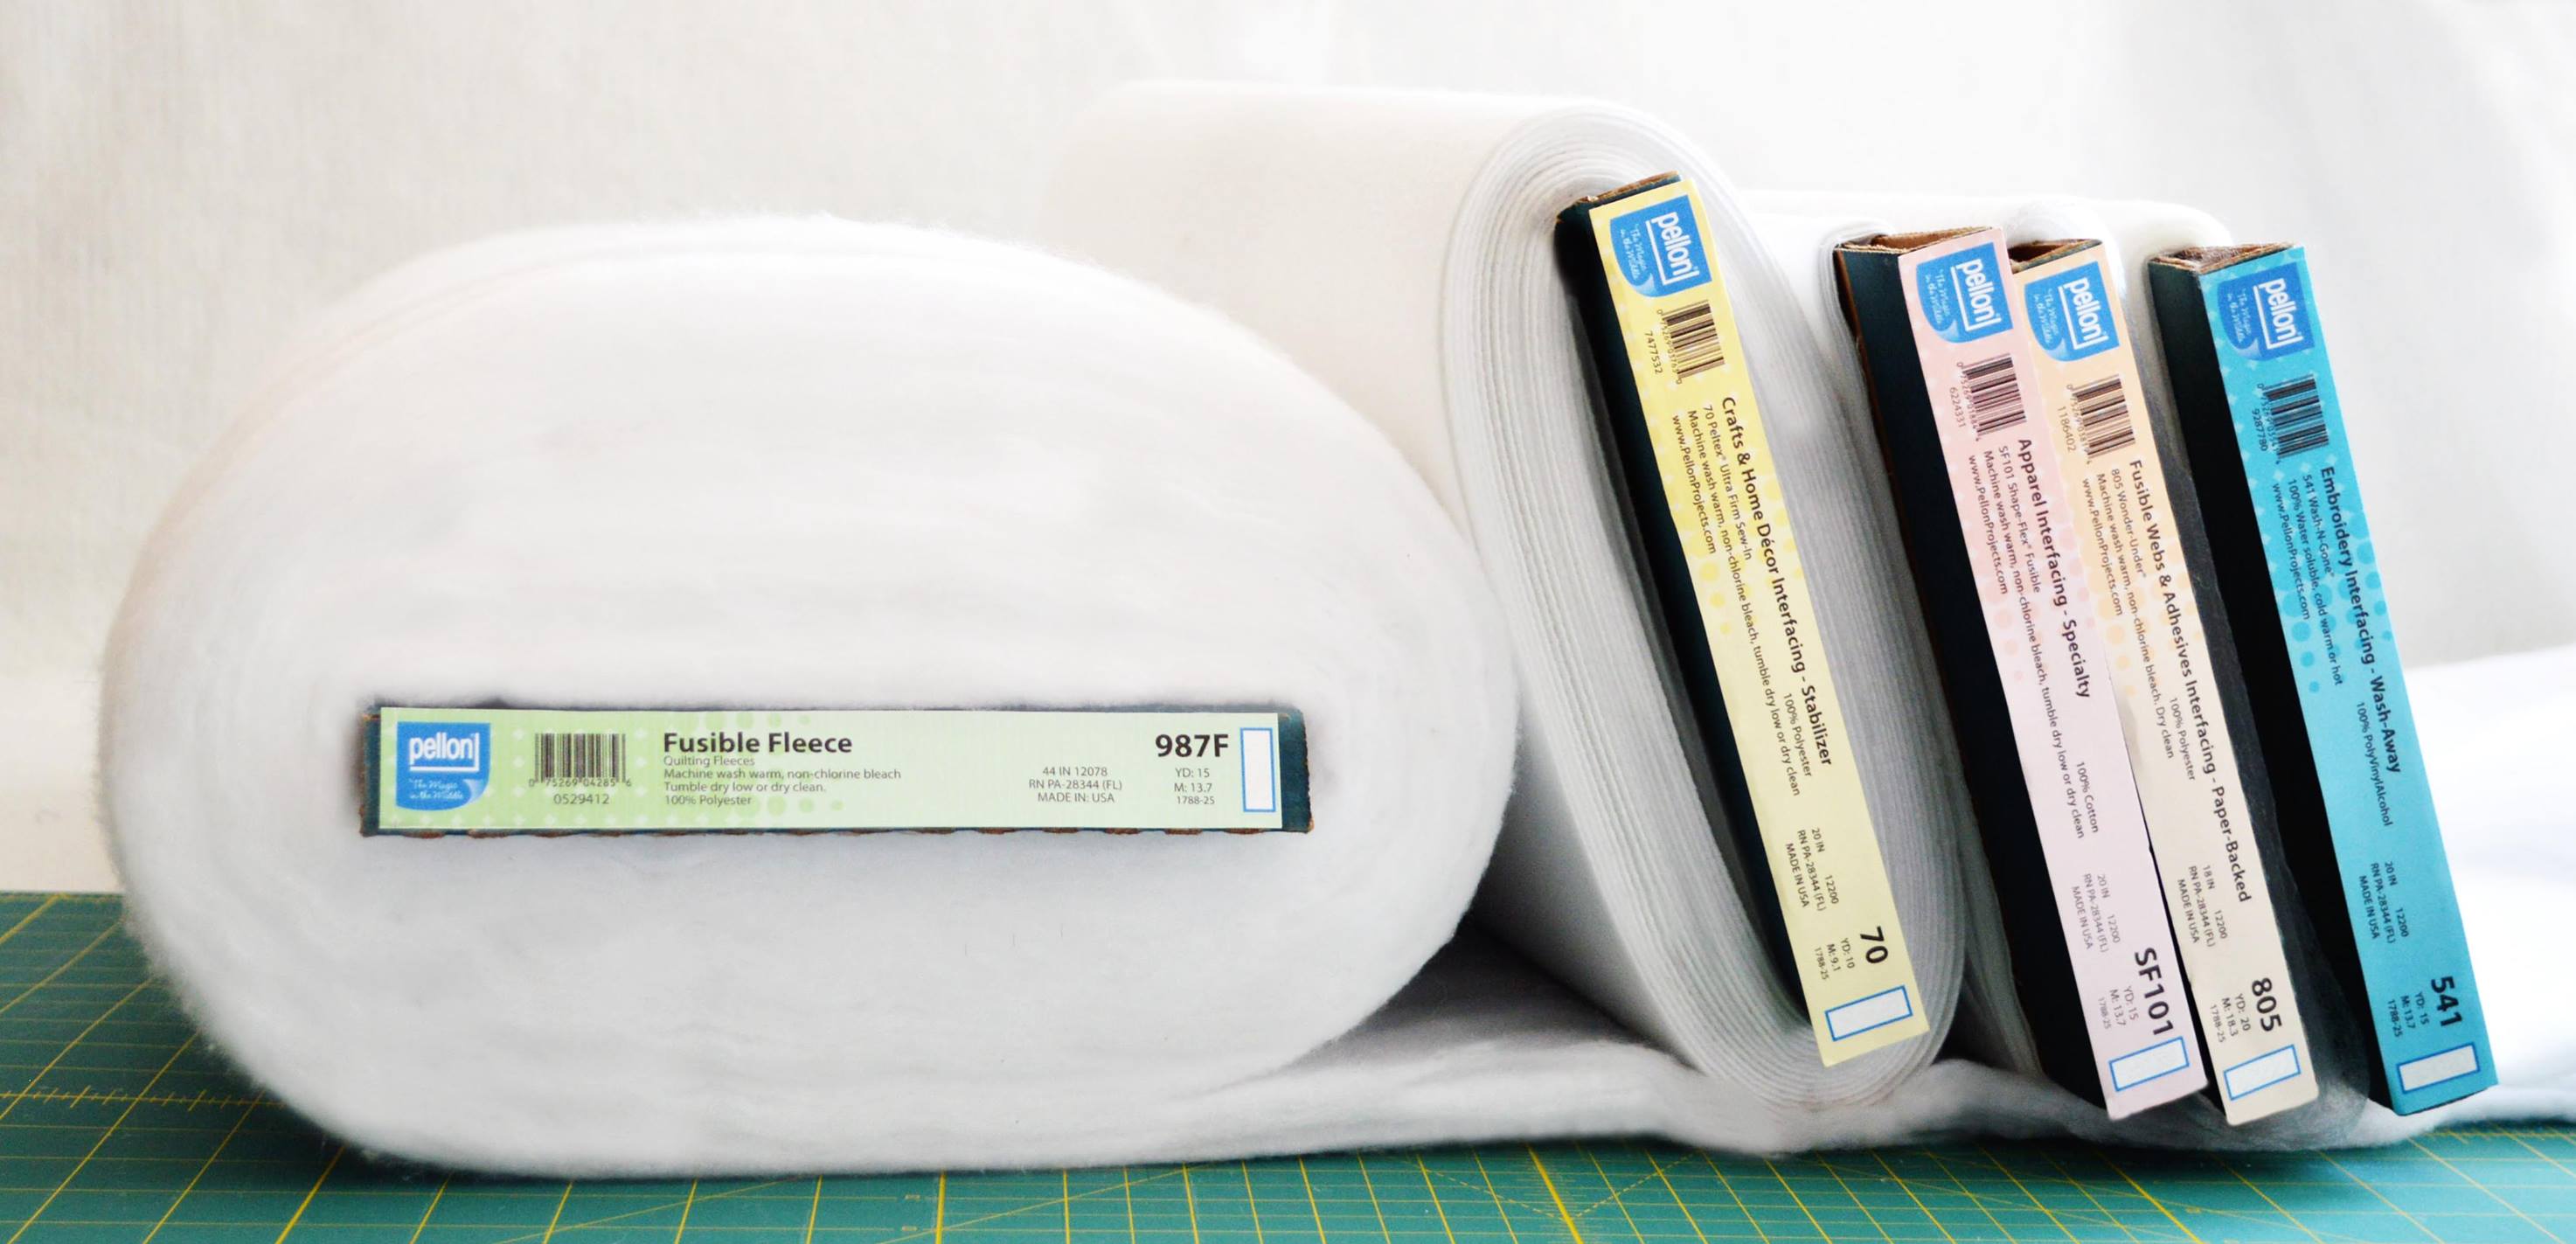 Pellon Stitch-N-Tear Fabric Stabilizer, White 20" x 15 Yards by the Bolt - 1 Pack - image 4 of 5